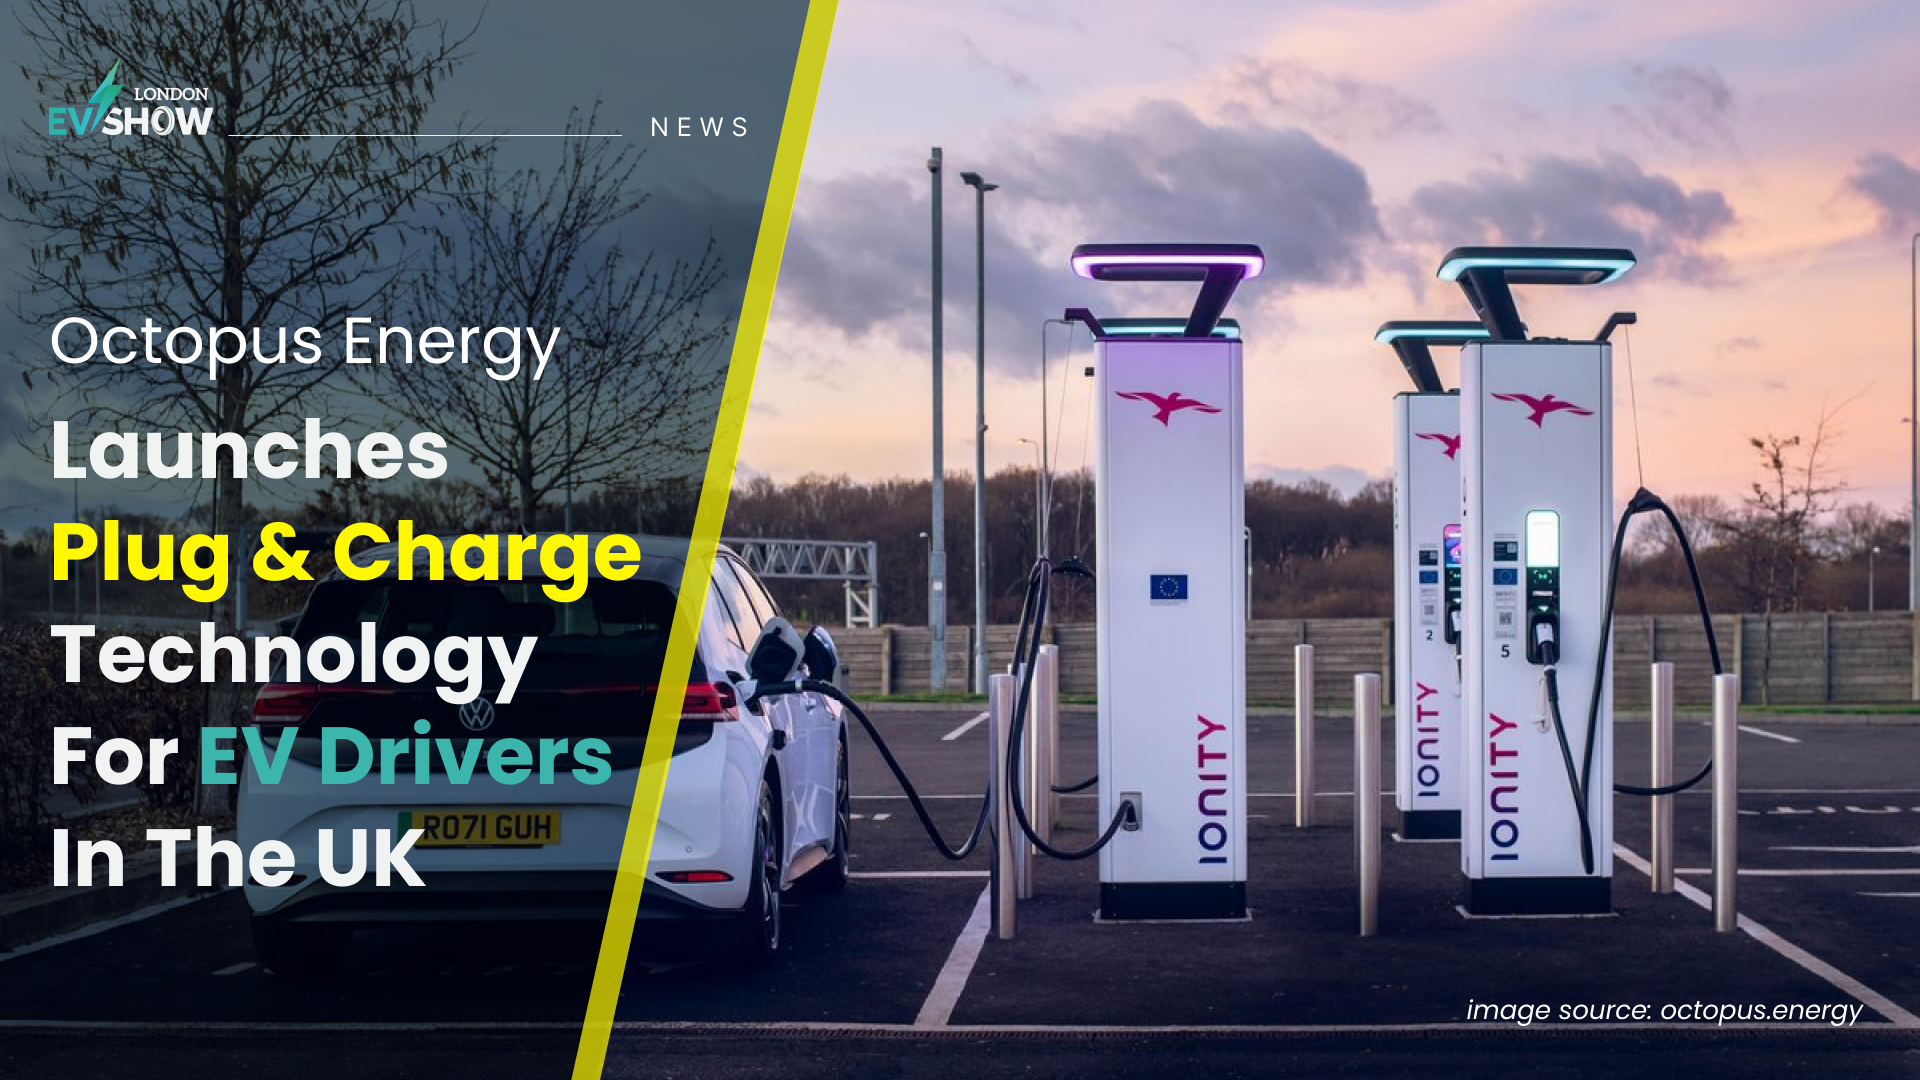 Octopus Energy Launches Plug & Charge Technology For EV Drivers In The UK